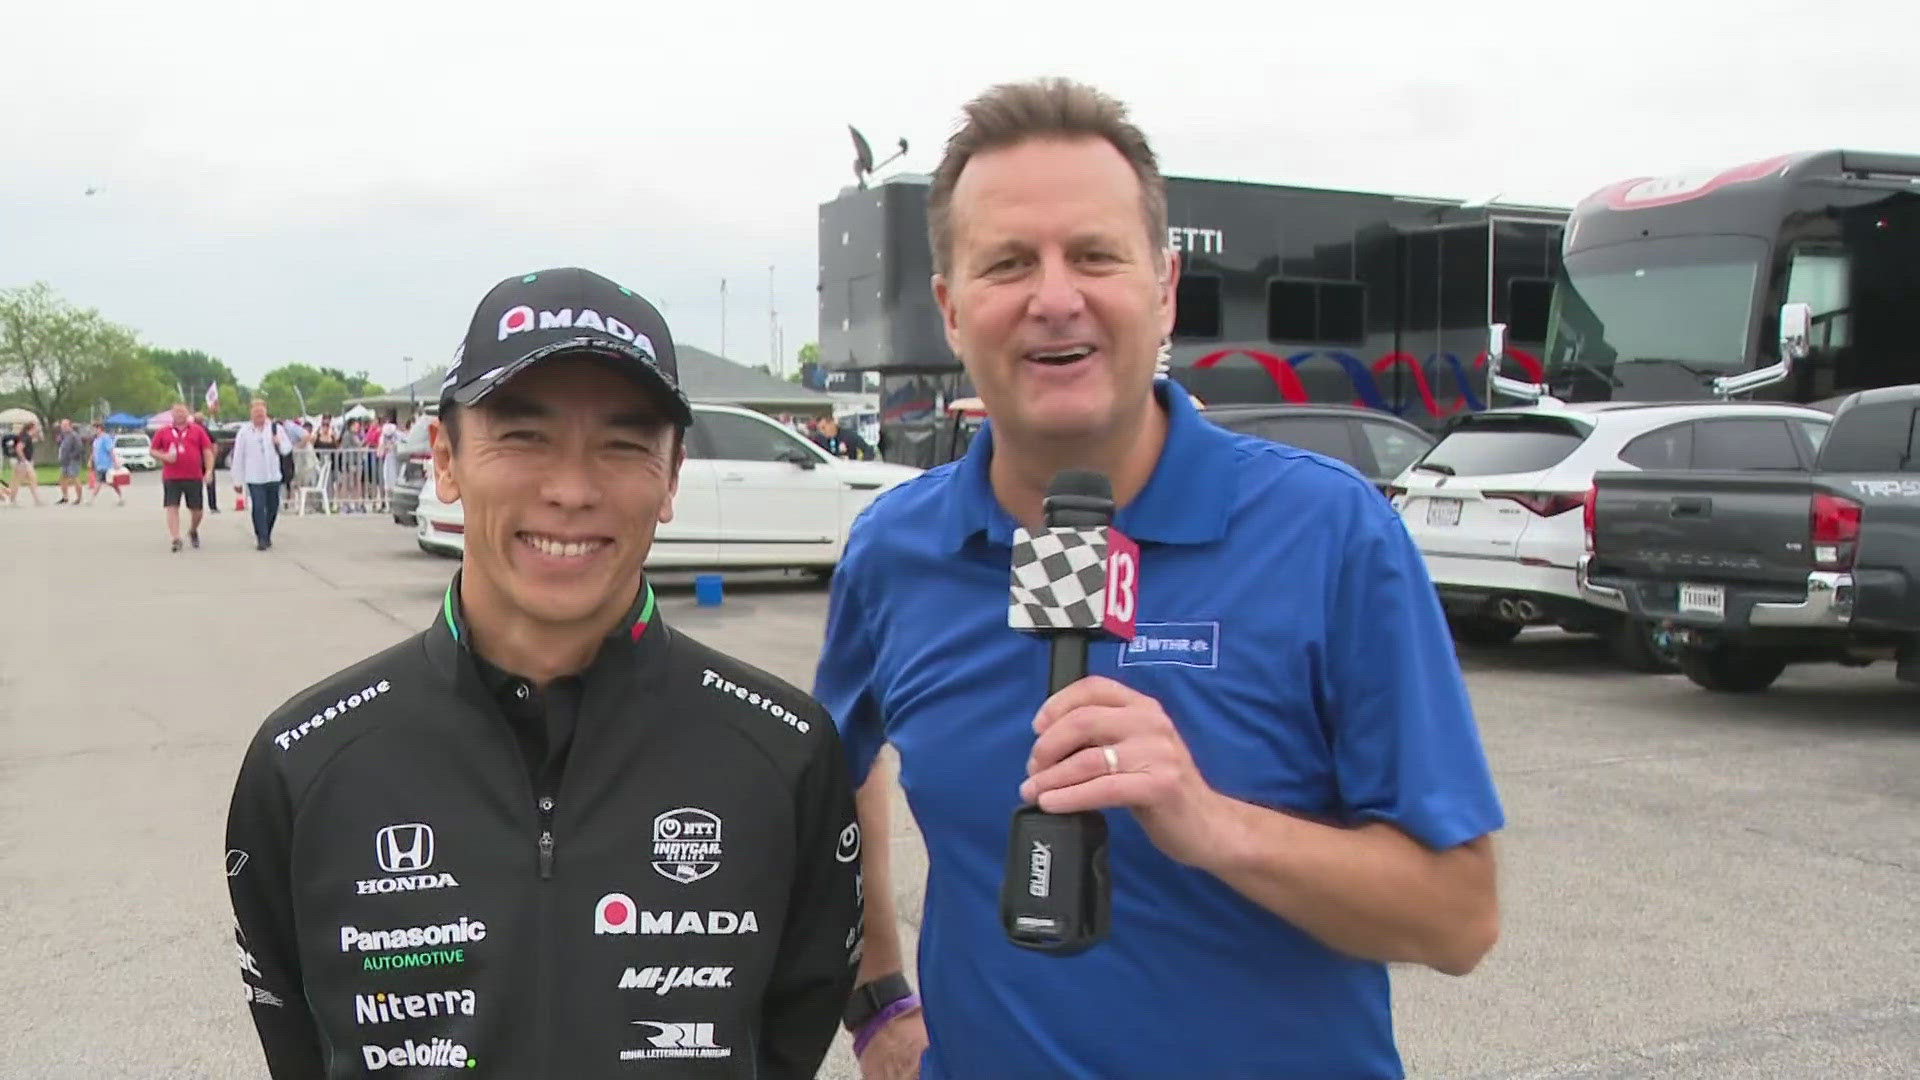 Takuma Sato starts 10th at this year's Indy 500. This will be his 15th Indy 500.